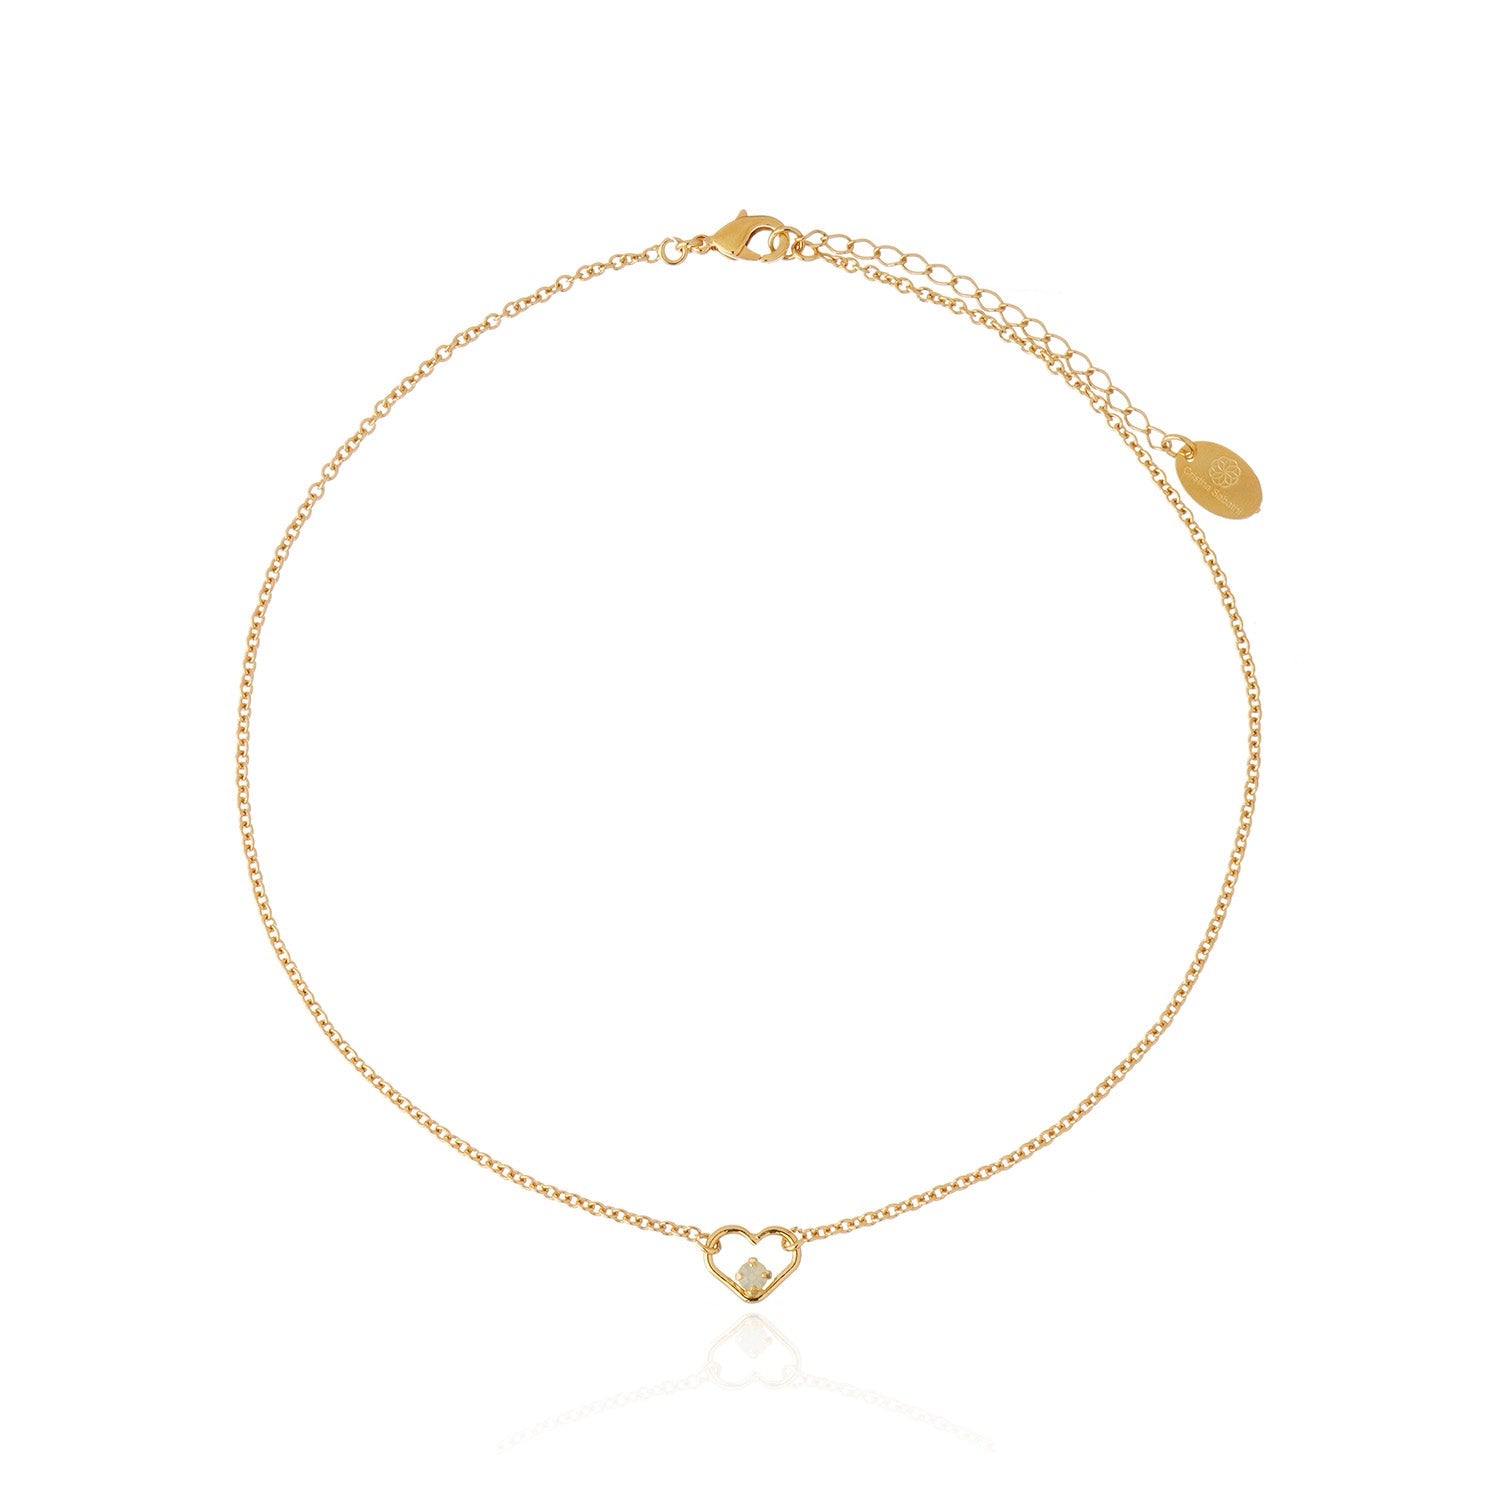 Amore Necklace - Moonstone Gold